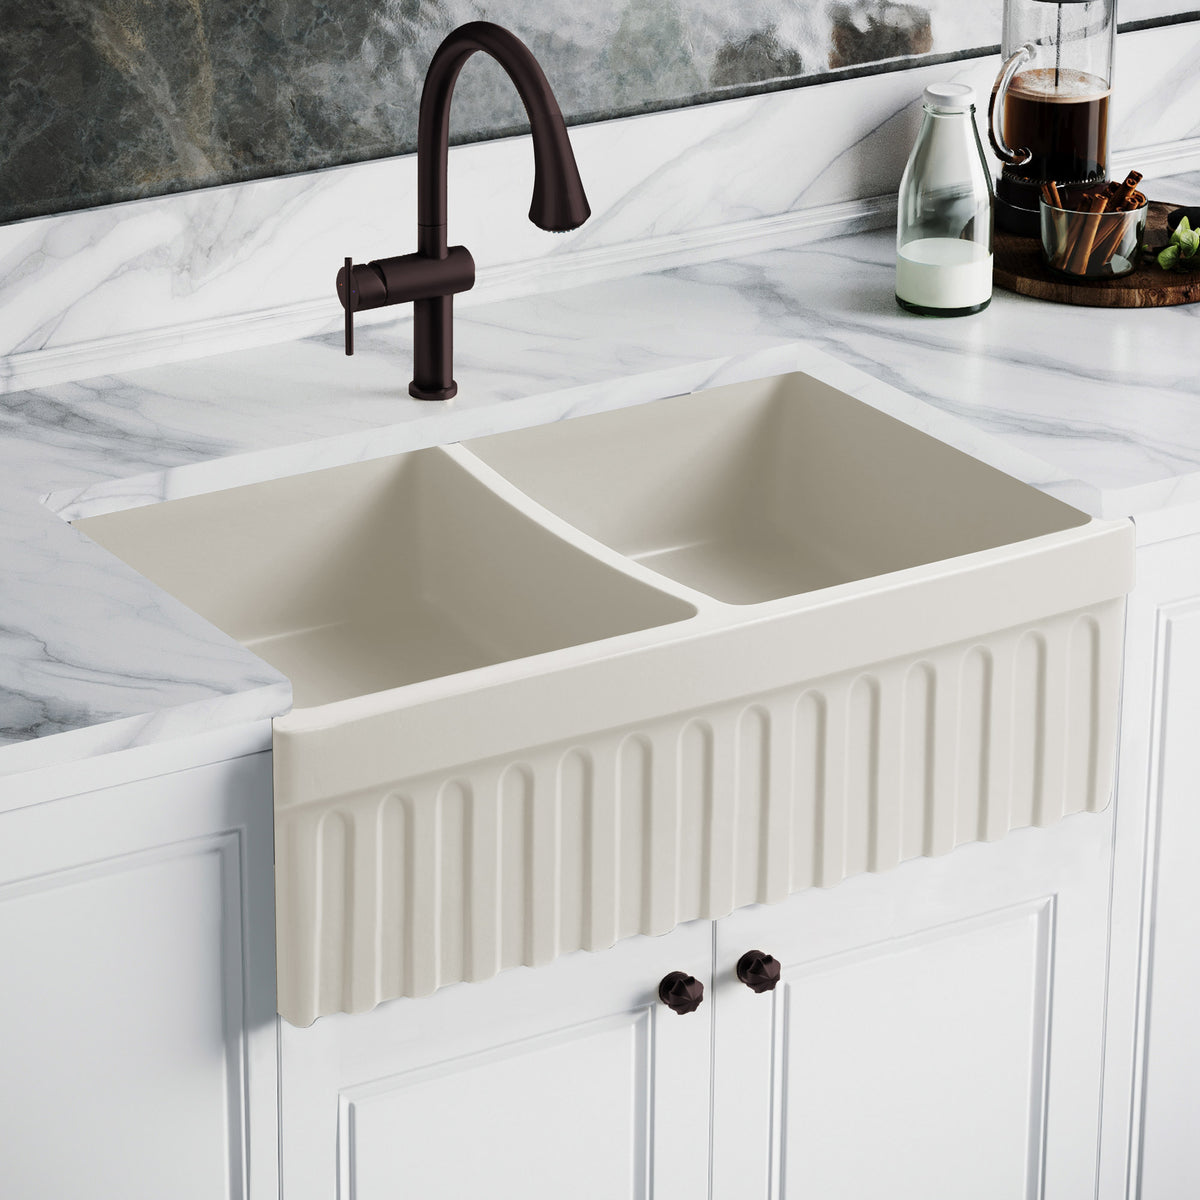 33 reversible double bowl fireclay kitchen sink: 2½” lip and fluted